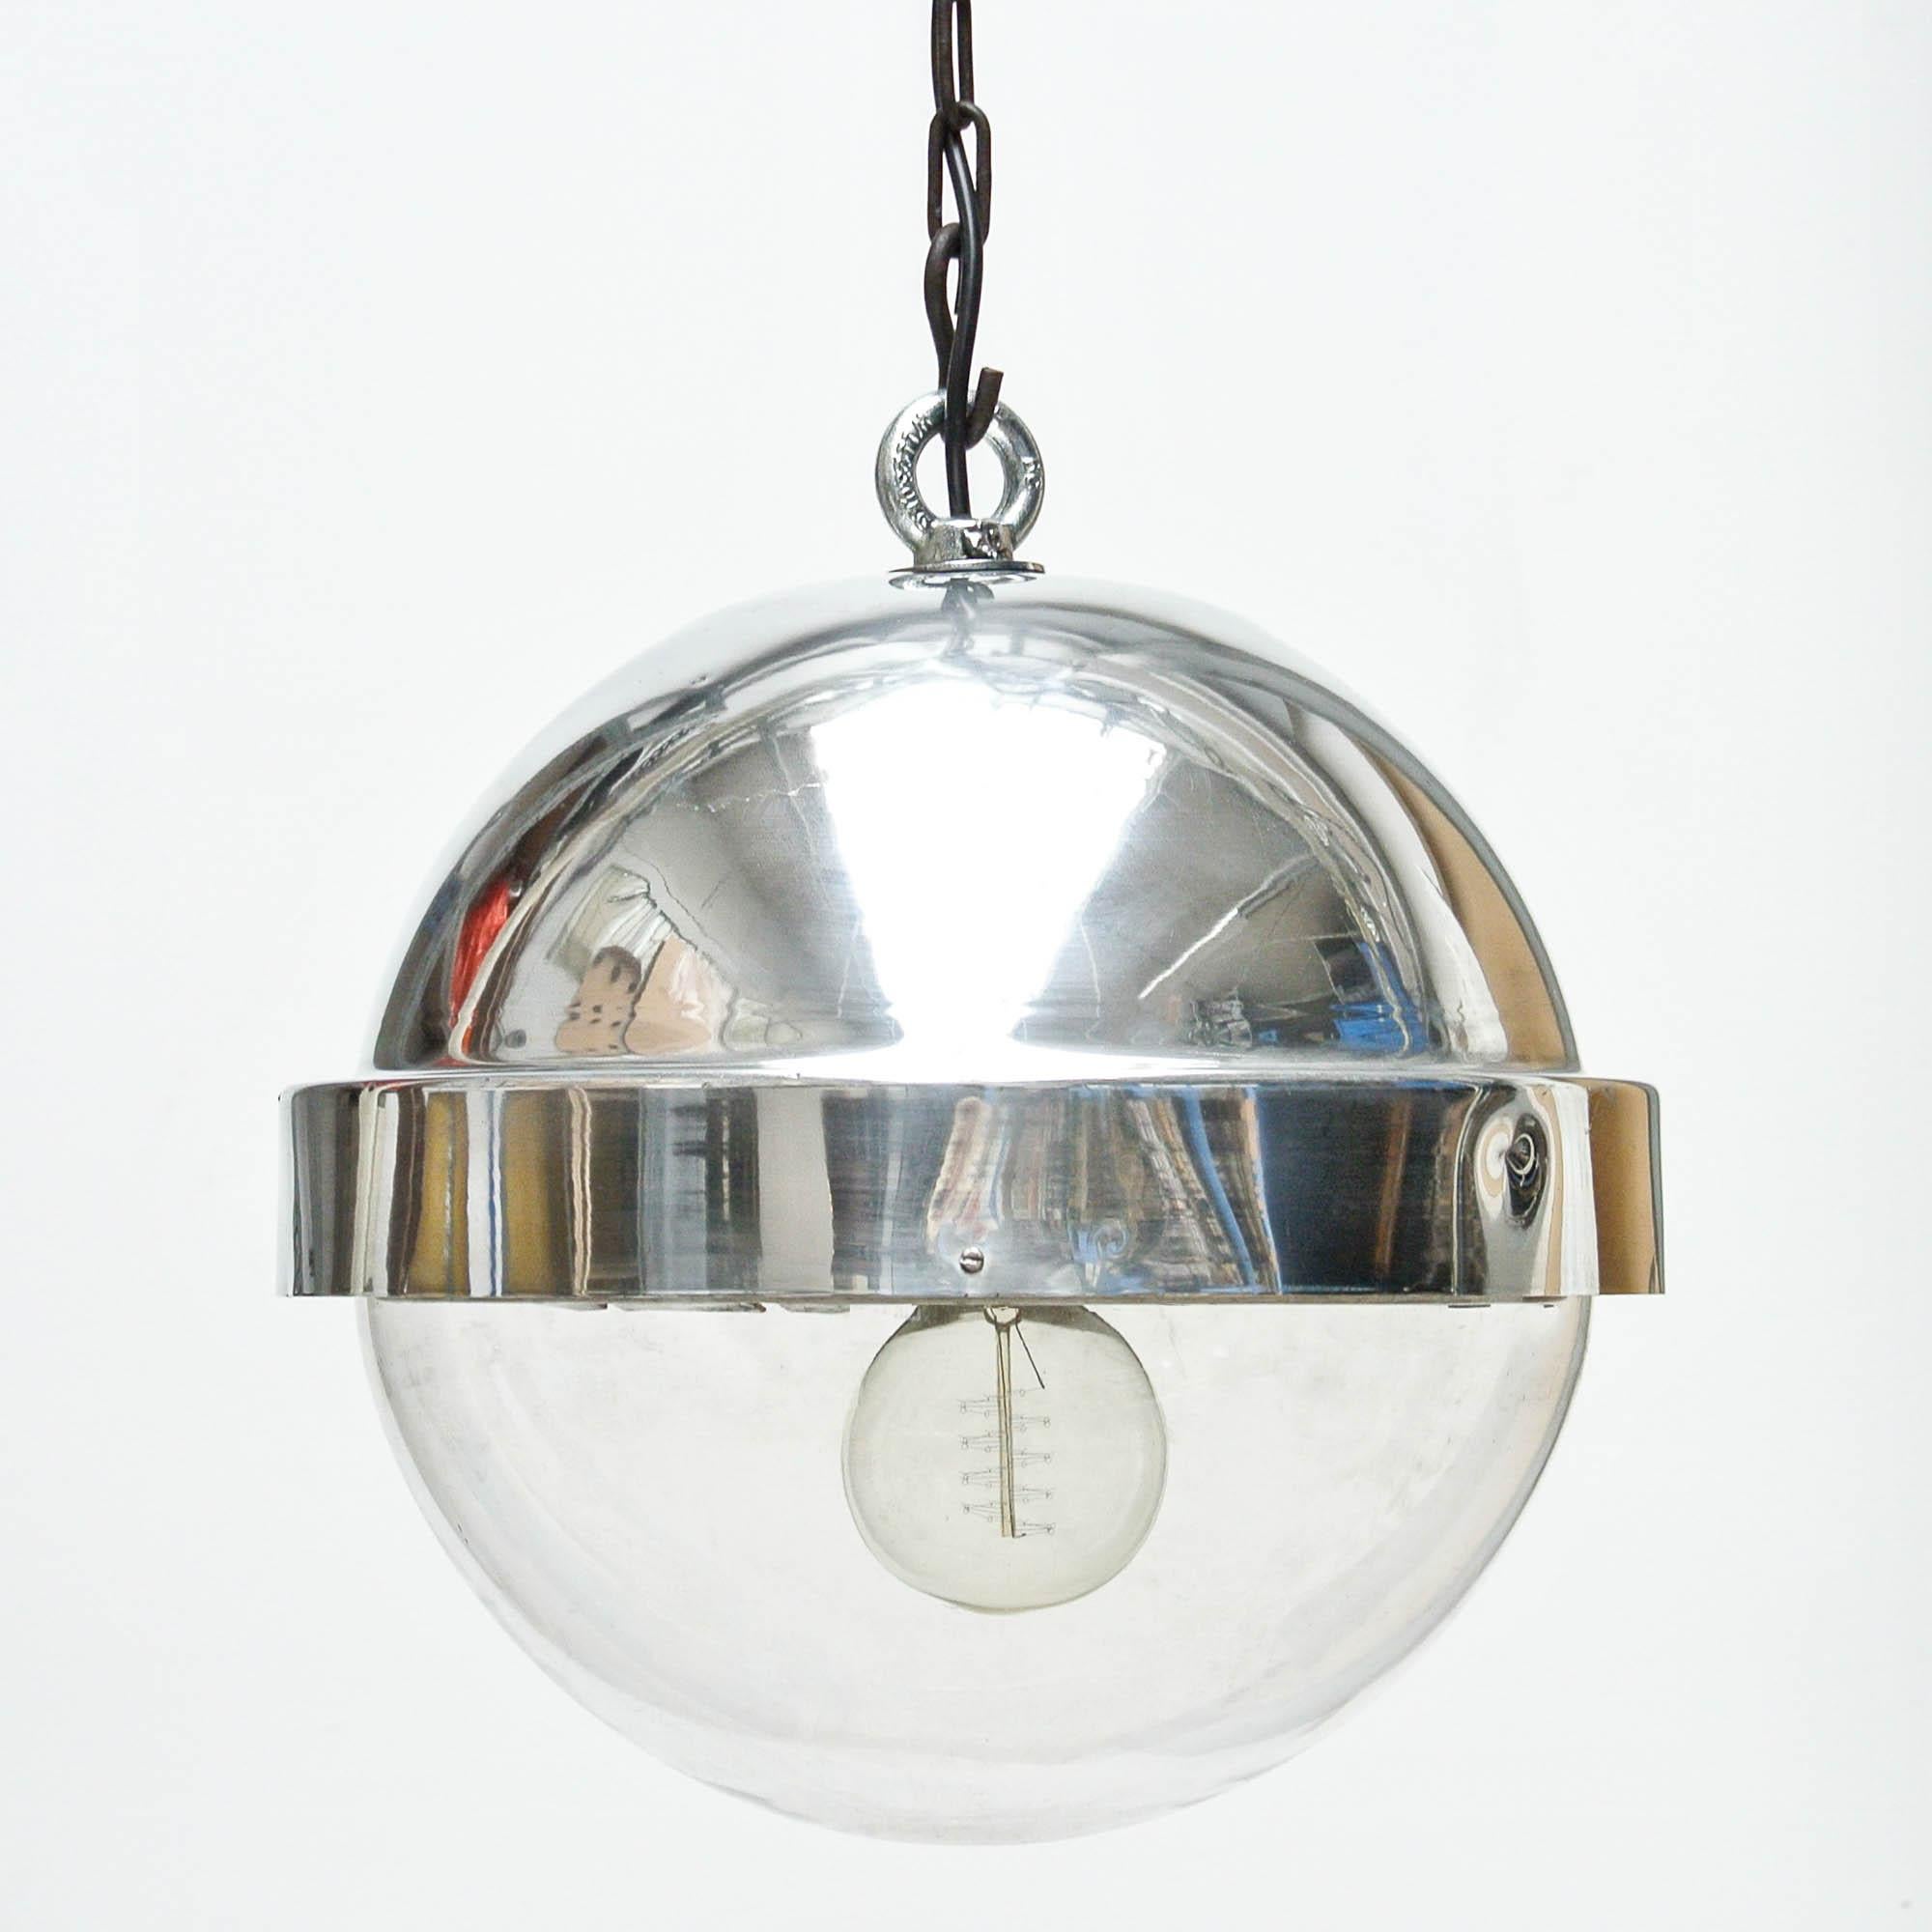 Industrial Aluminium Ball Lamp, circa 1960 from France, Aluminium and Plexyglass Polished